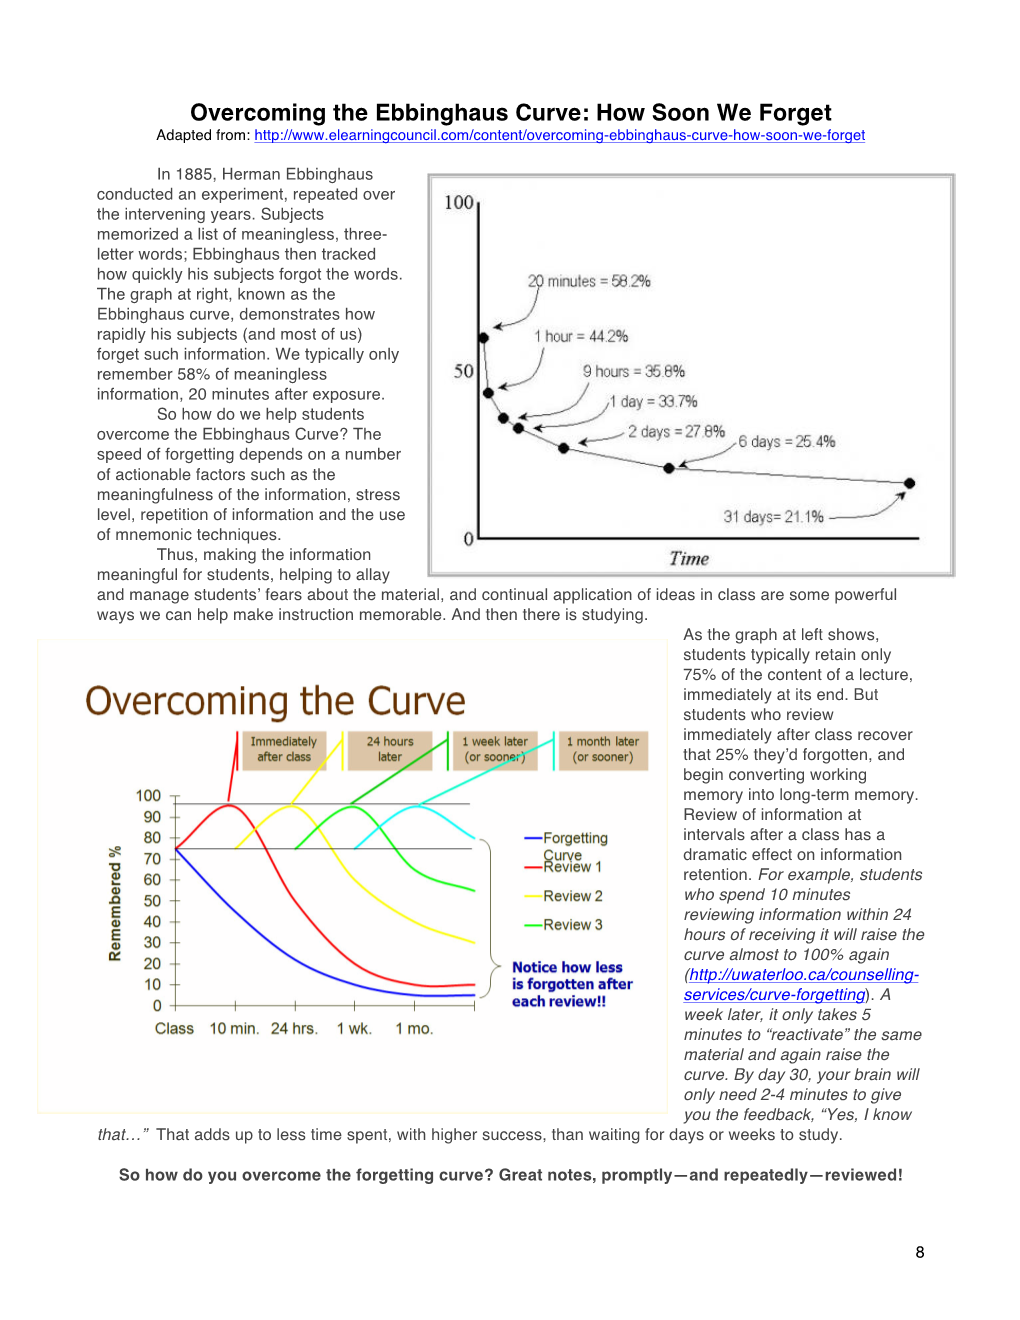 Ebbinghaus Curve on Forgetting